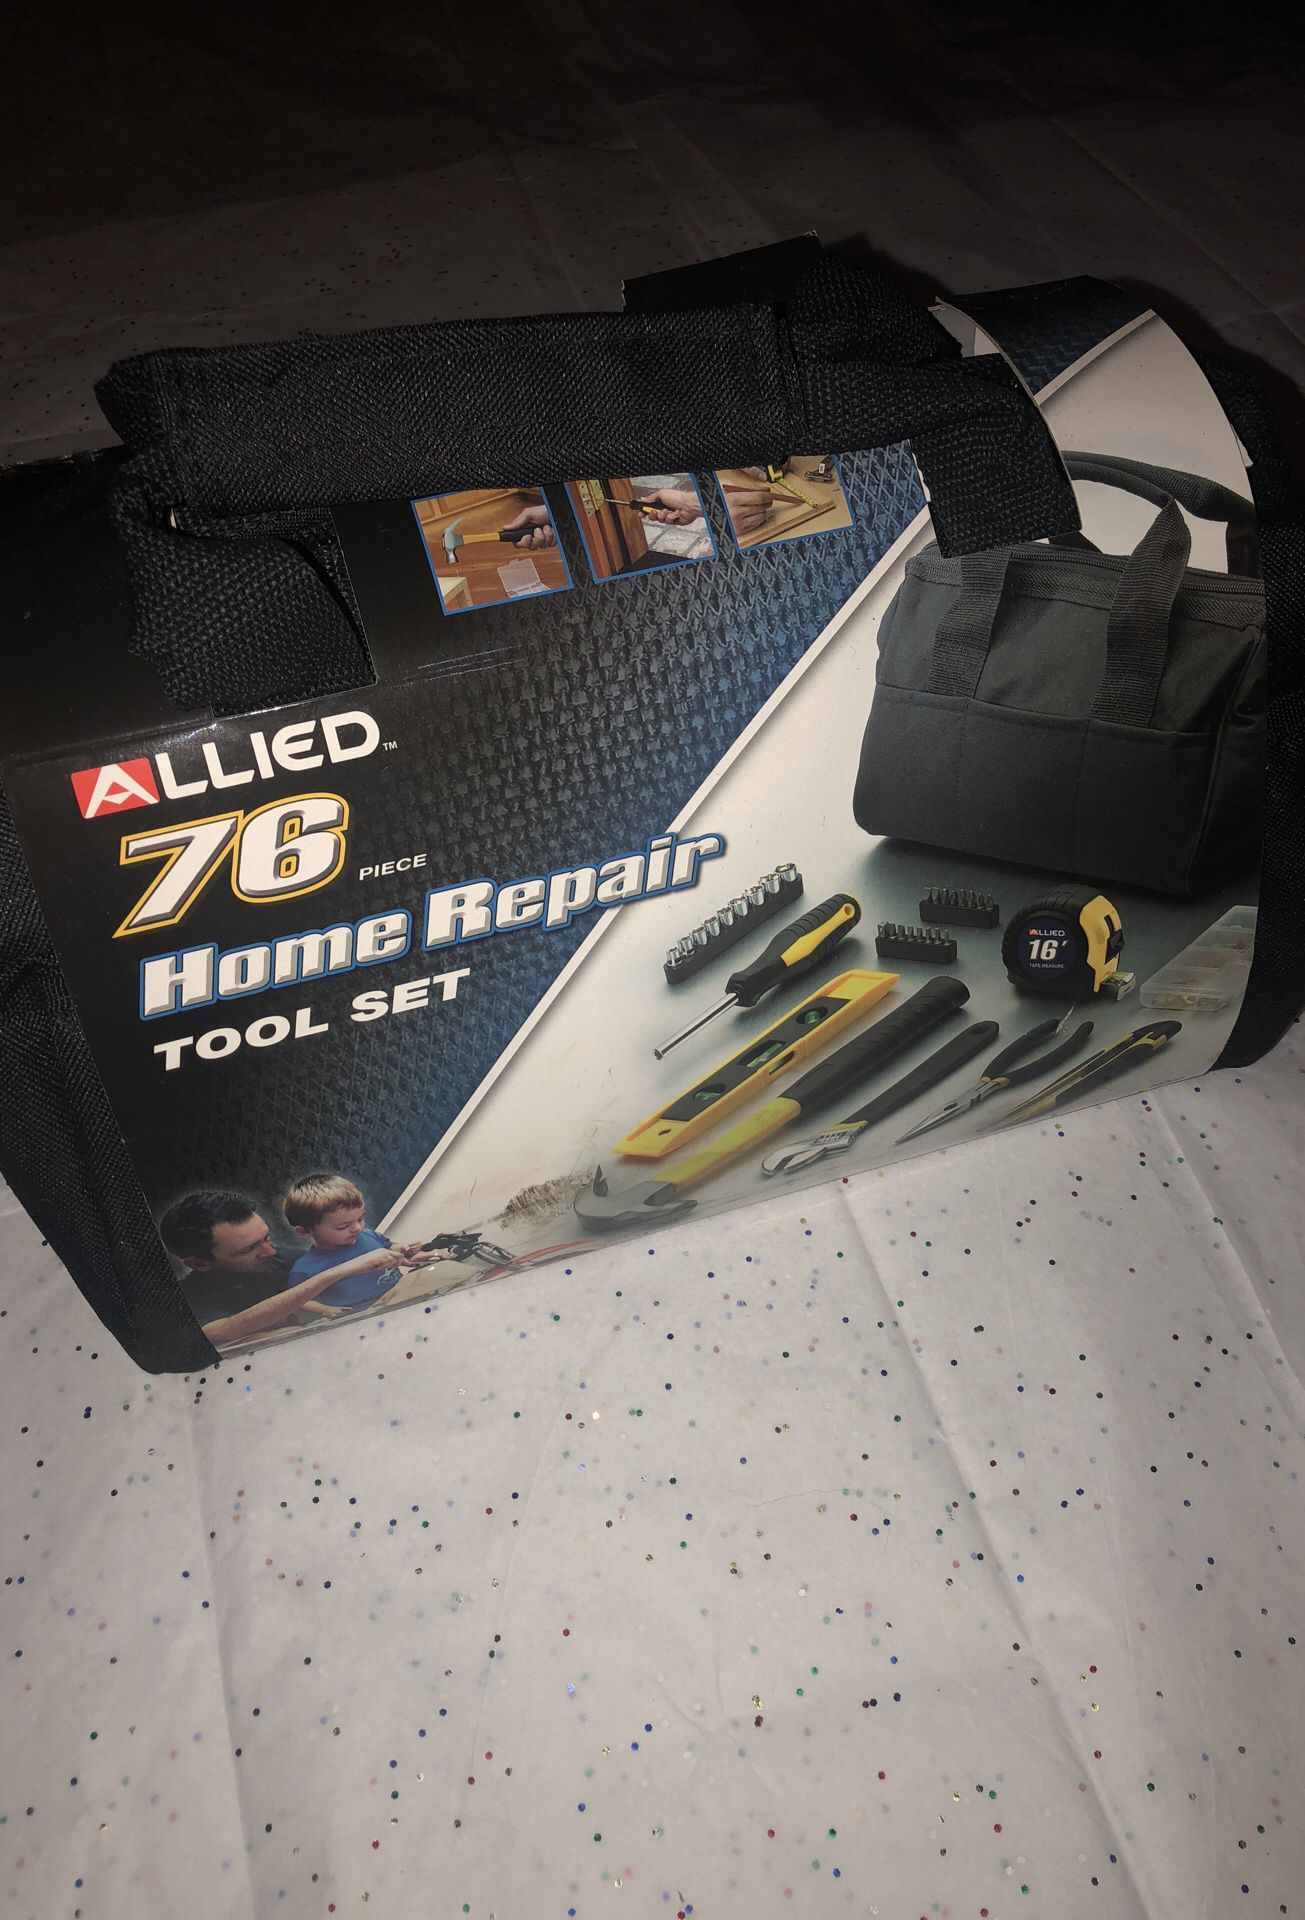 Allied Tools Home Repair 76 Piece Tool Set